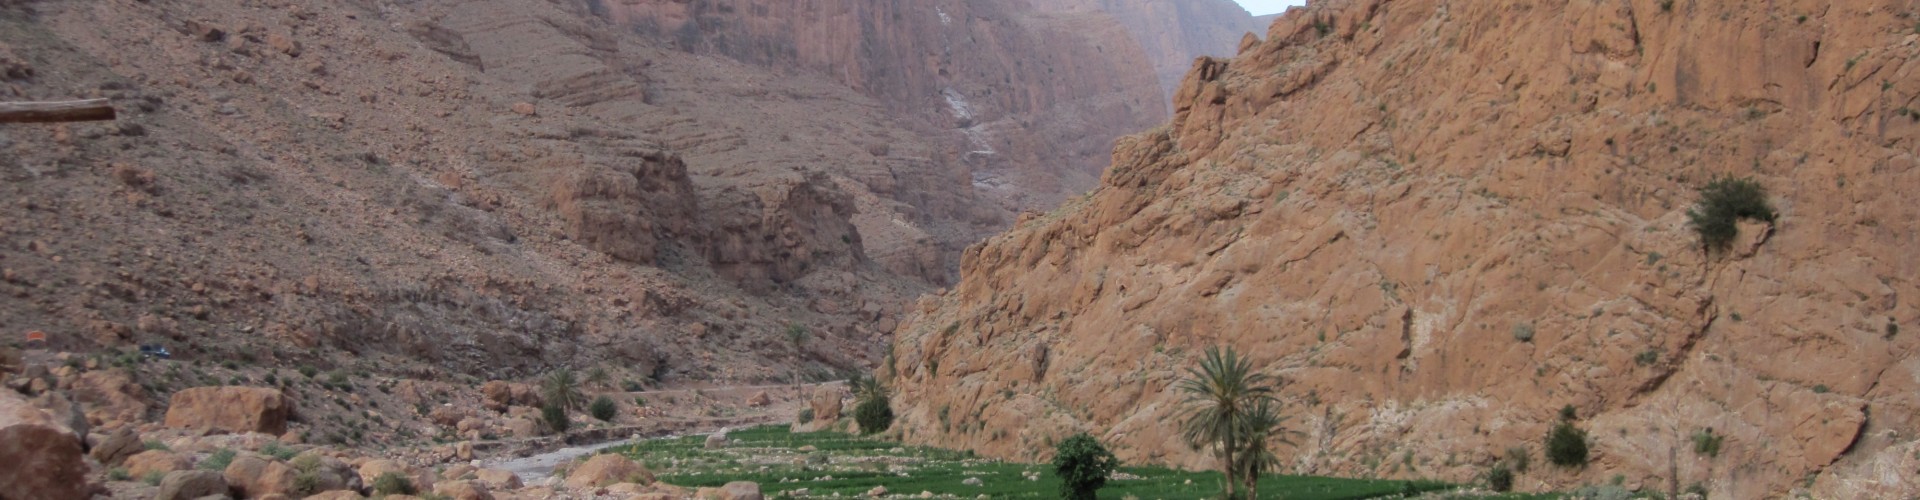 Morocco - Skoura & the Valley of the Kasbahs - Todra Gorge